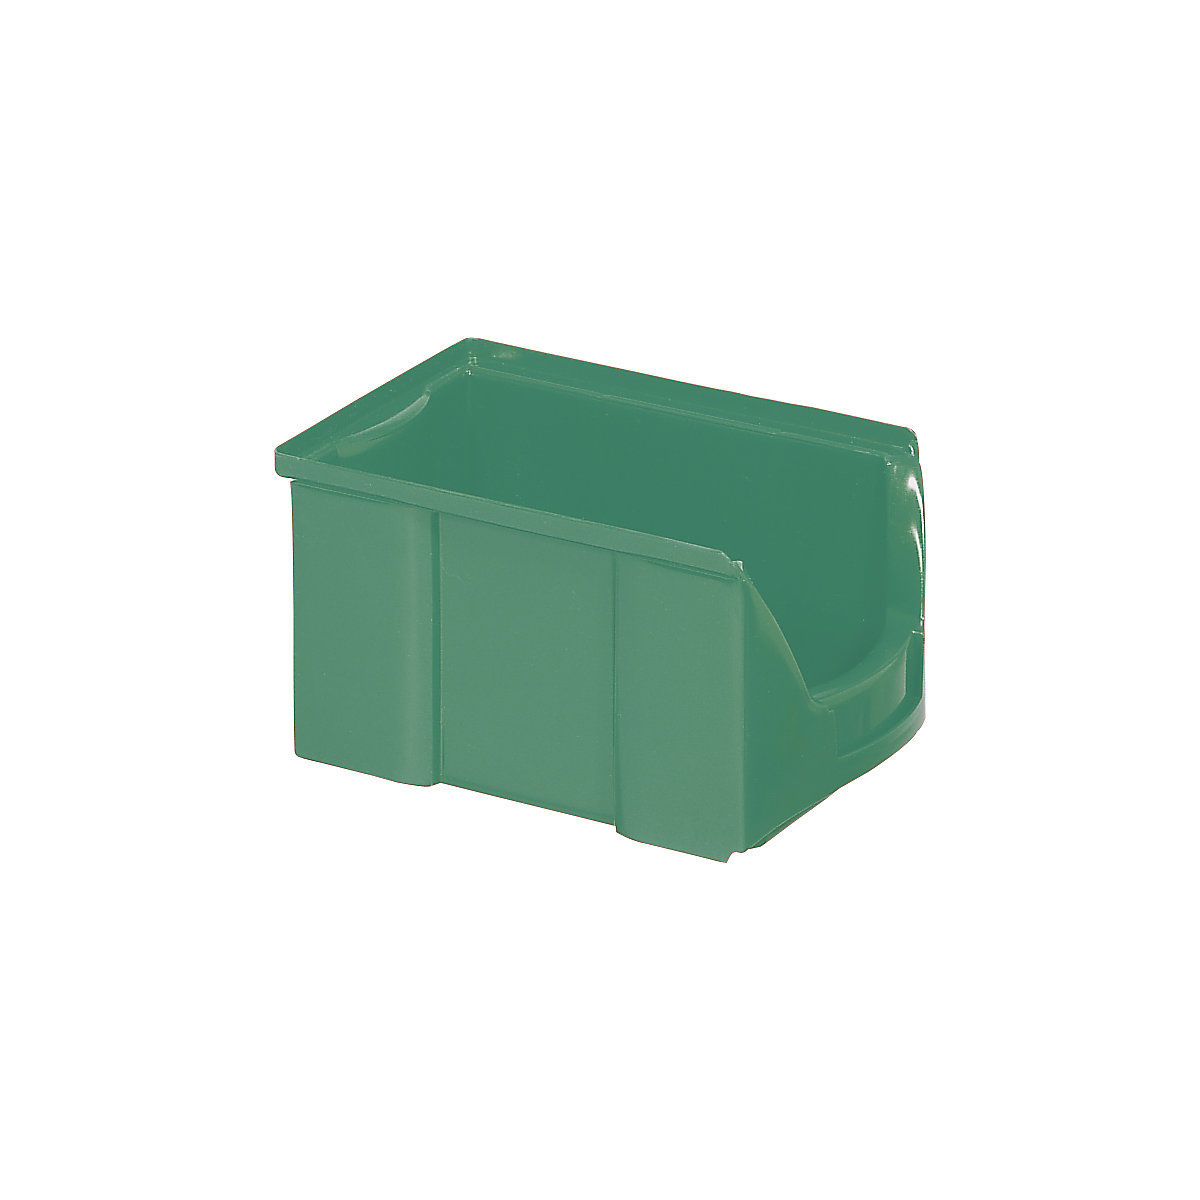 FUTURA open fronted storage bin made of polyethylene, LxWxH 229 x 148 x 122 mm, pack of 25, green-16